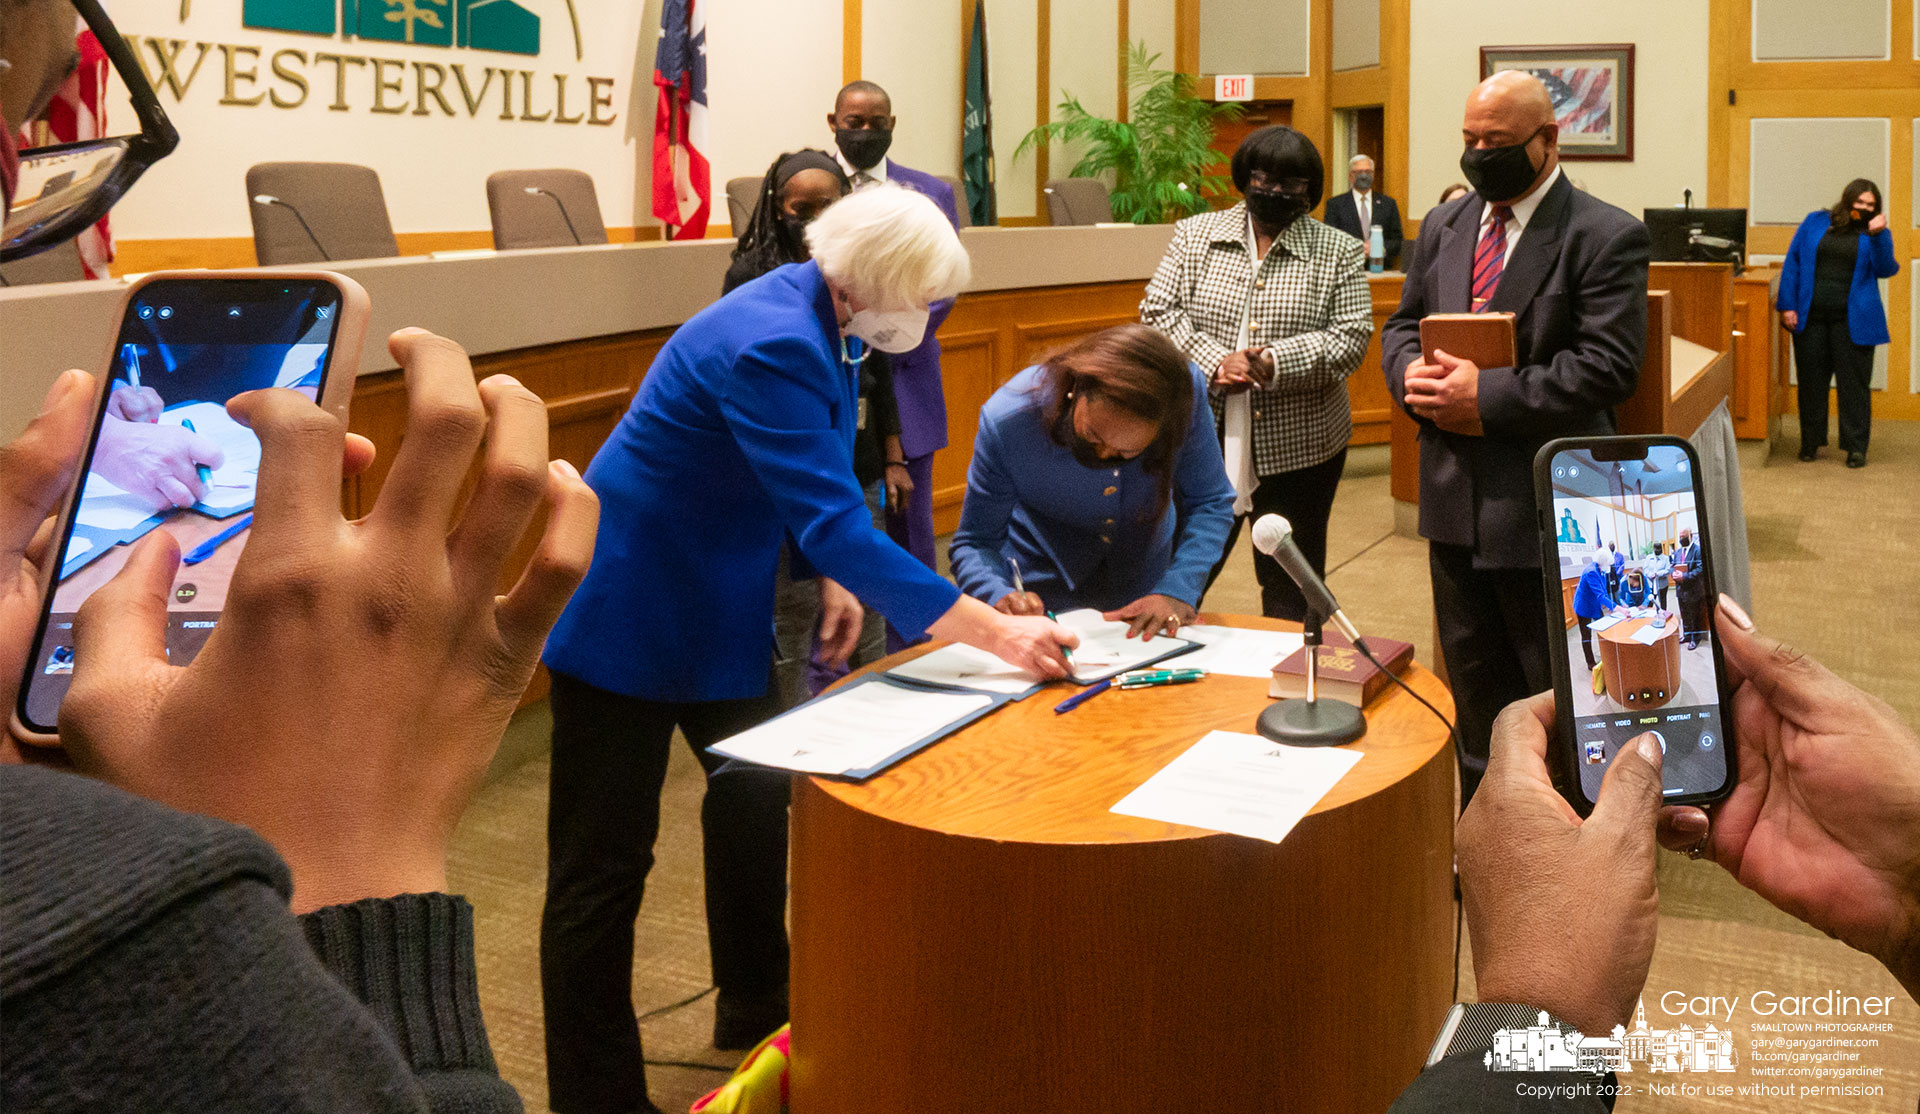 Newly sworn-in Westerville City Councilwoman Coutanya Coombs signs paperwork certifying her status on the council. My Final Photo for Jan. 4, 2022.